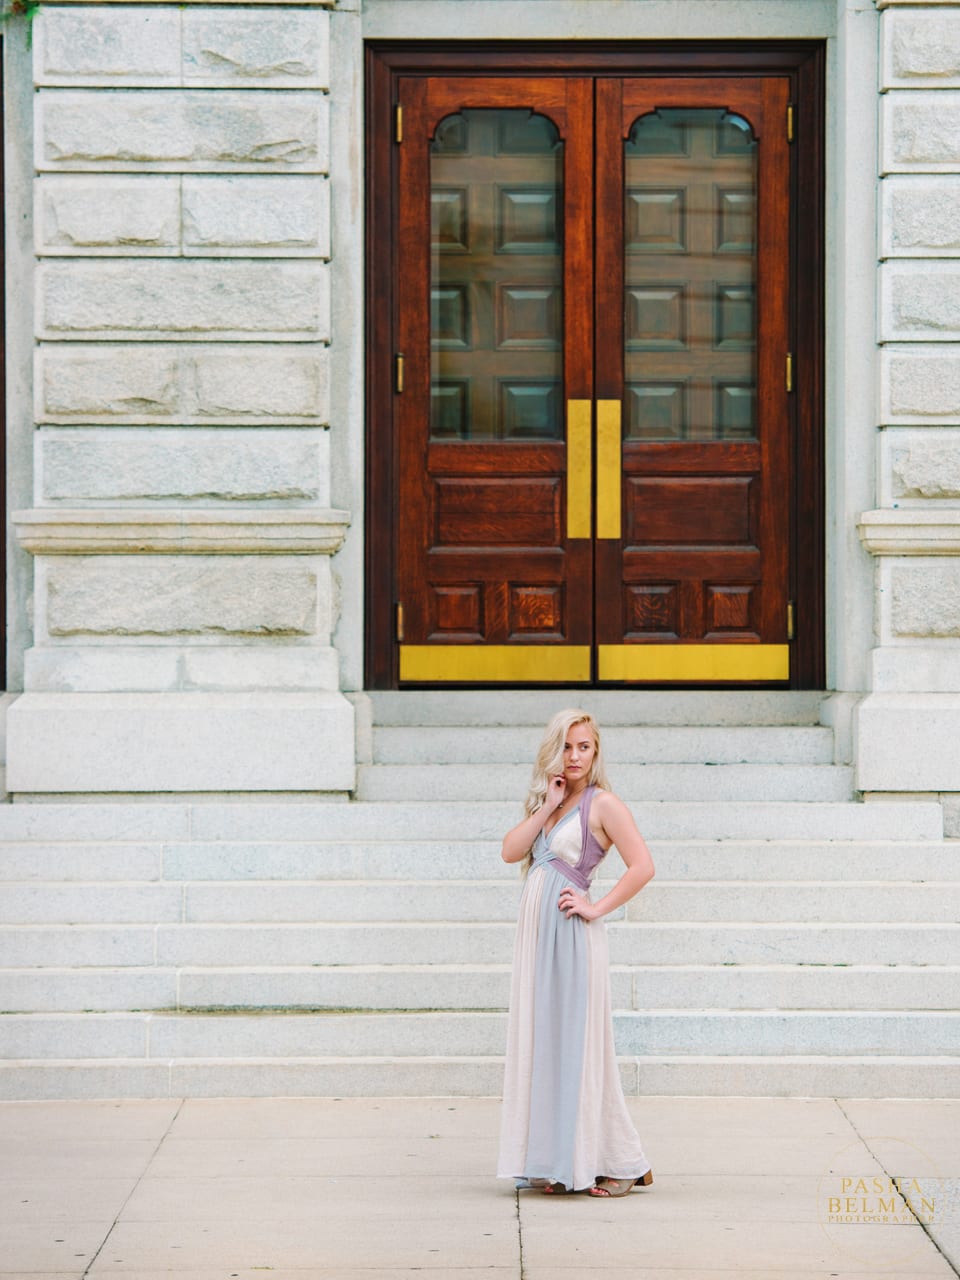 Gorgeous high school senior pictures in downtown Charleston SC by Pasha Belman Photographer